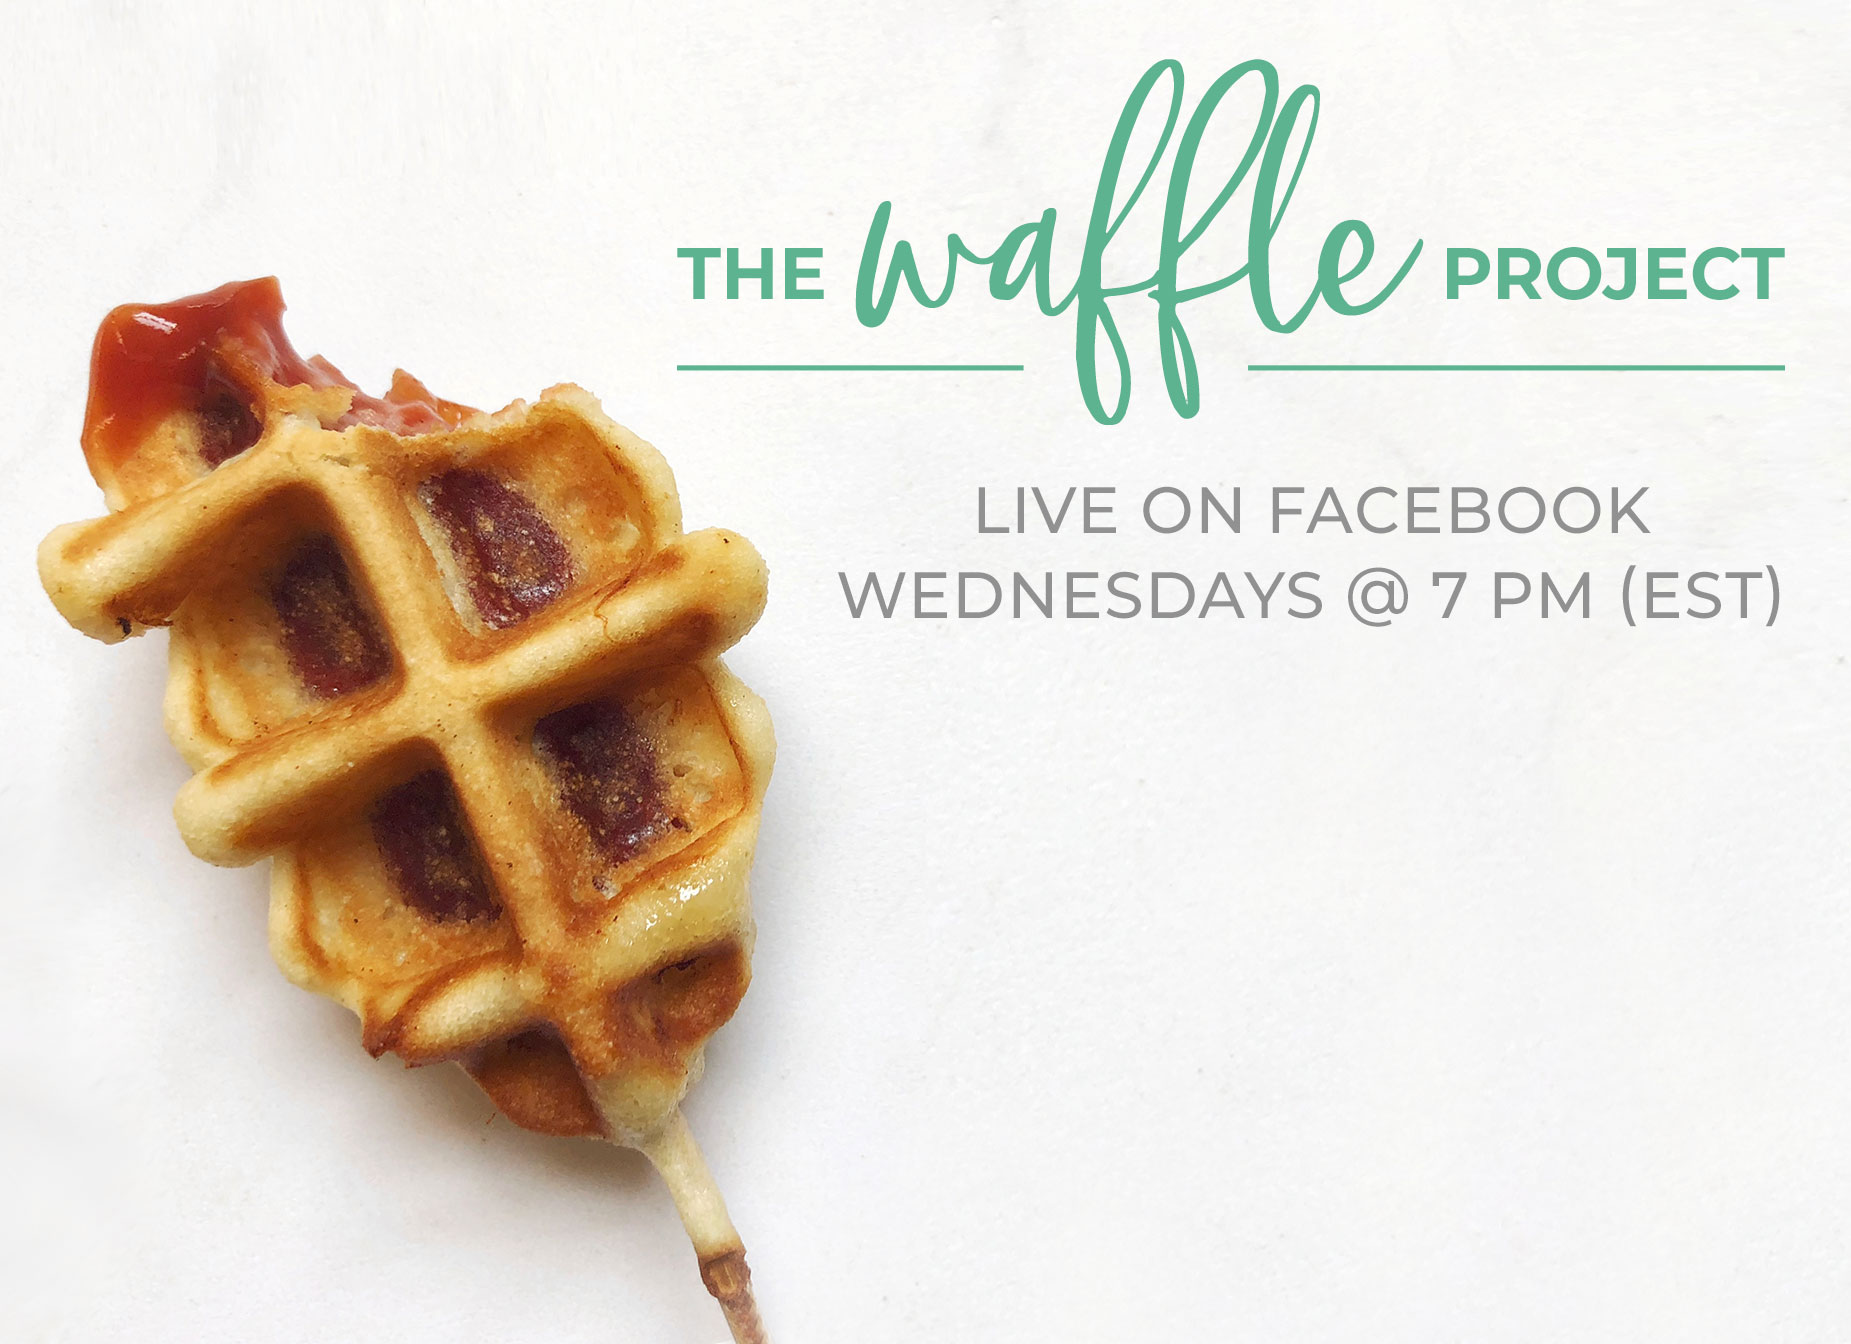 Watch The Waffle Project LIVE on Facebook every Wednesday at 7 PM (via our Facebook page)